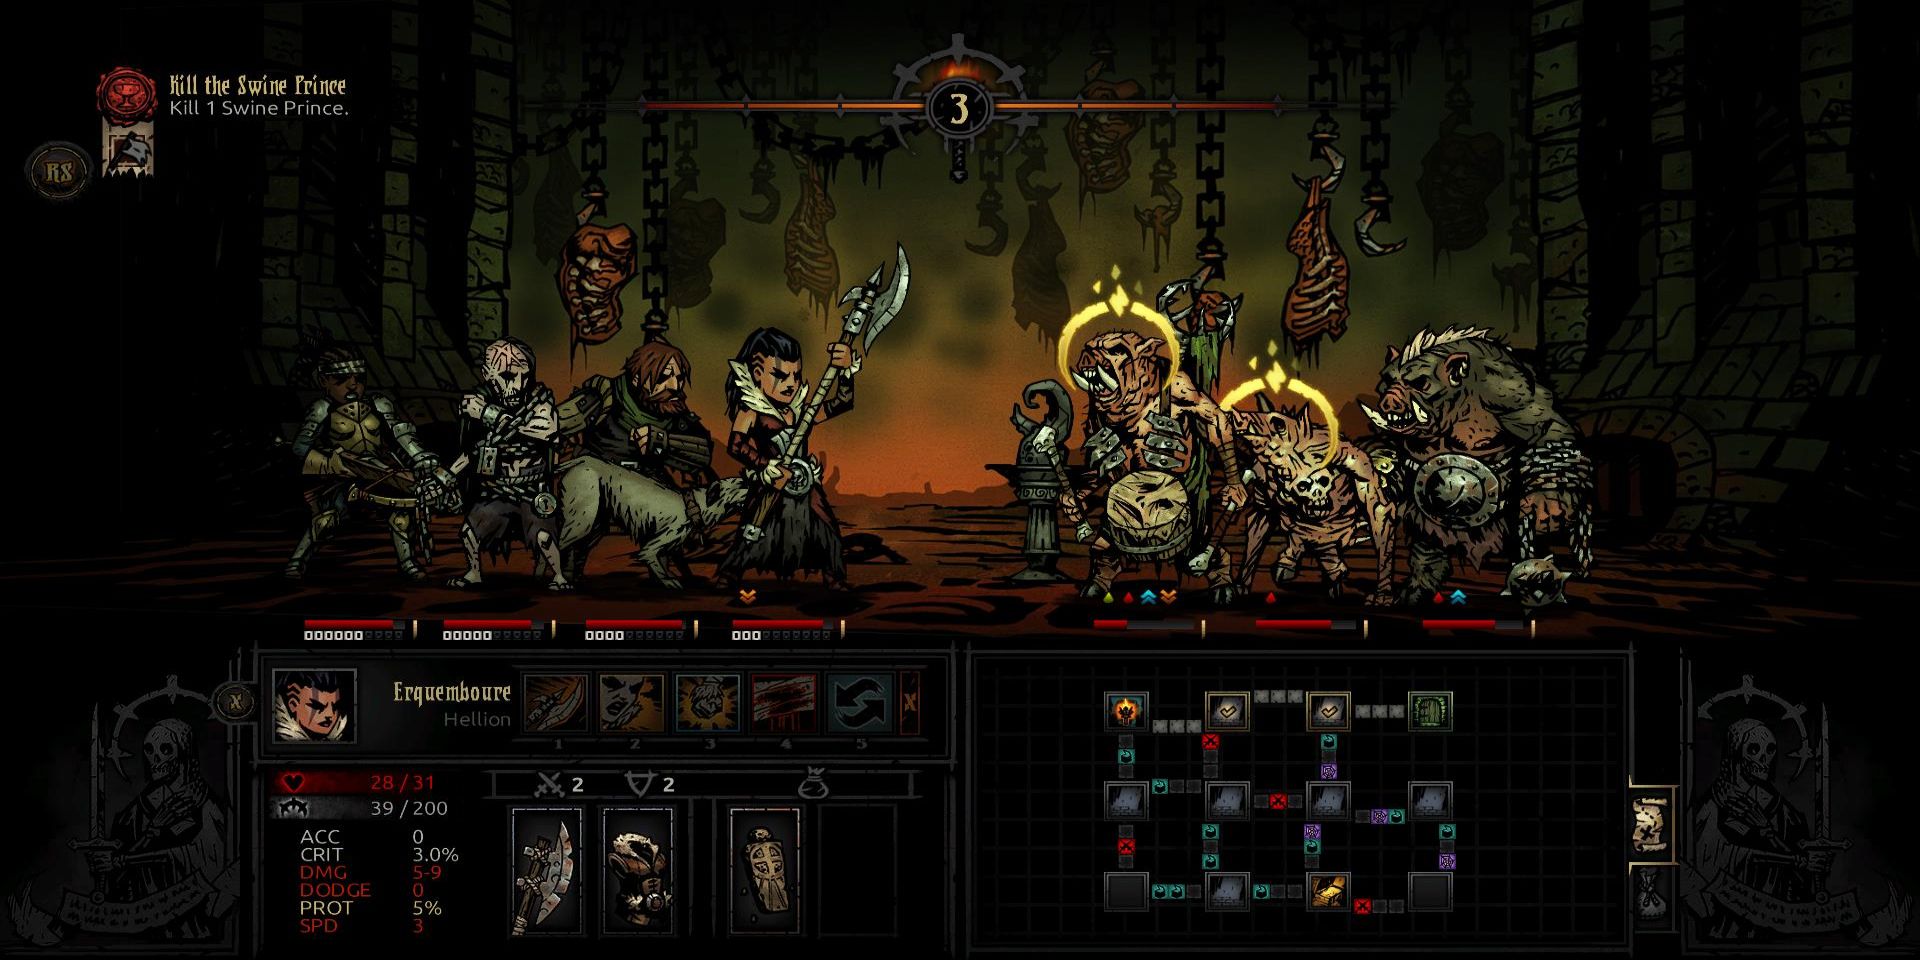 Combat in indie game Darkest Dungeon, with the player's party on the left facing a group of grisly pig-like creatures on the right.